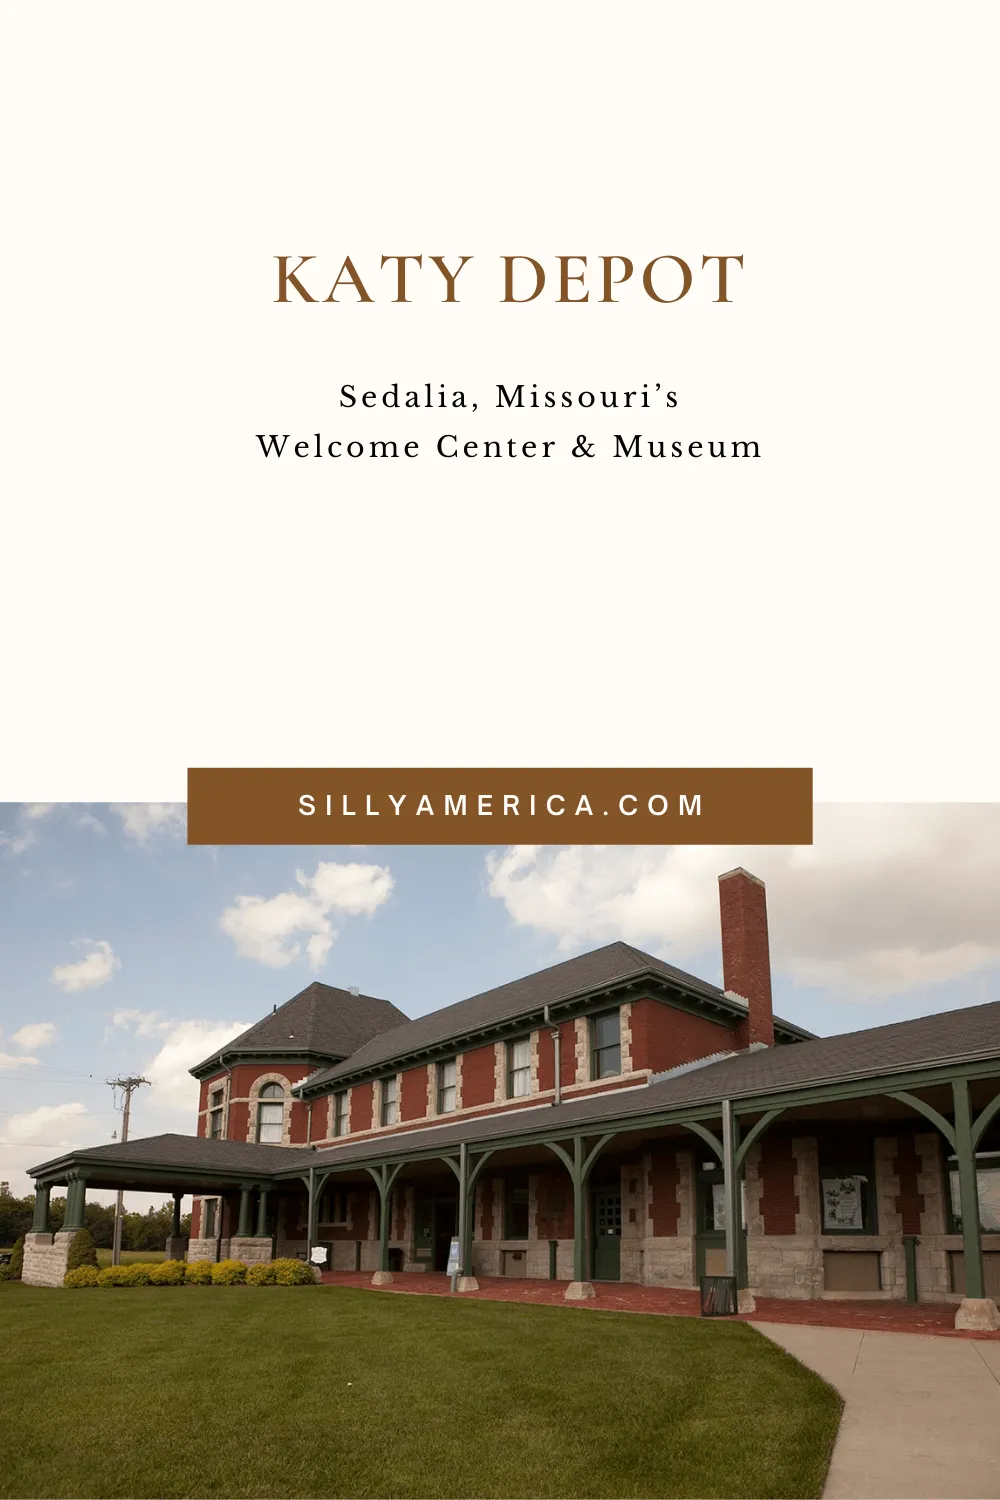 Built in 1896, the Katy Depot in Sedalia, Missouri was once a fully-functioning railroad station. Today, it serves as Sedalia's official welcome center. Visit the public art and historical displays on your Missouri road trip at this roadside attraction.  #MissouriRoadsideAttractions #MissouriRoadsideAttraction #RoadsideAttractions #RoadsideAttraction #RoadTrip #MissouriRoadTrip #MissouriRoadTripMap #PlacestoVisitinMissouri #MissouriRoadTripIdeas #MissouriTravelRoadTrip #RoadTrip